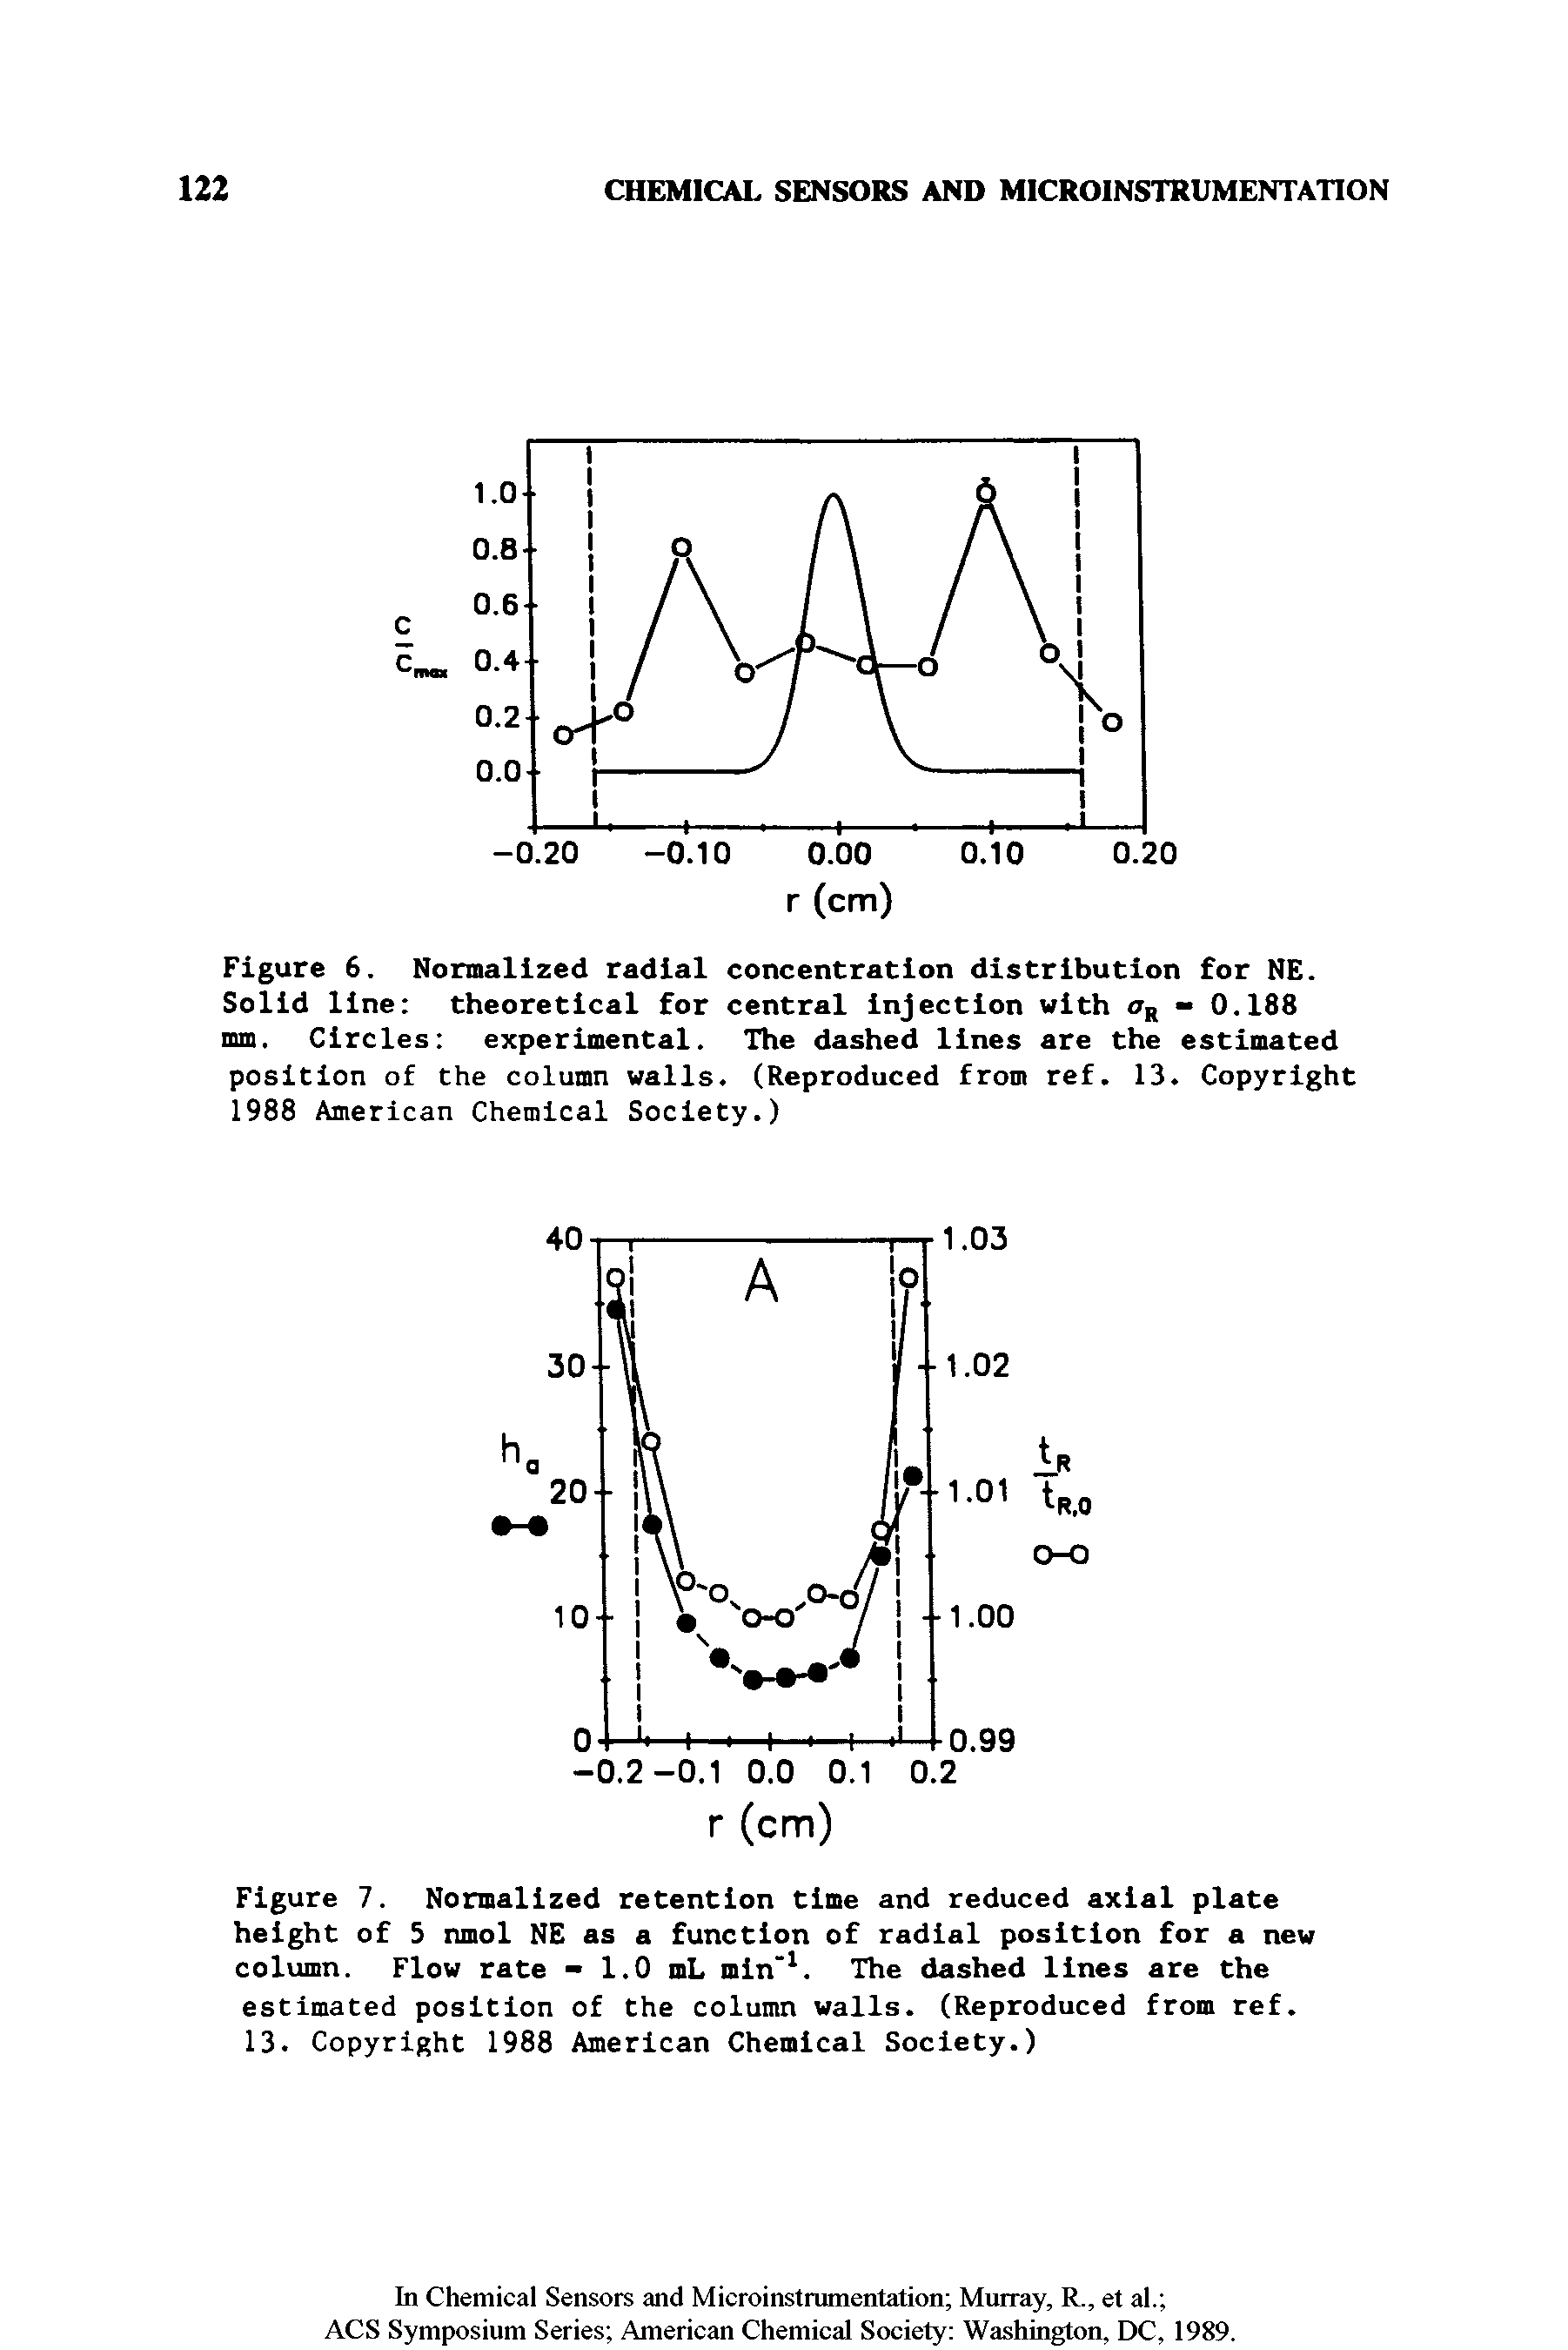 Figure 7. Normalized retention time and reduced axial plate height of 5 nmol NE as a function of radial position for a new column. Flow rate - 1.0 mL mln. The dashed lines are the estimated position of the column walls. (Reproduced from ref. 13. Copyright 1988 American Chemical Society.)...